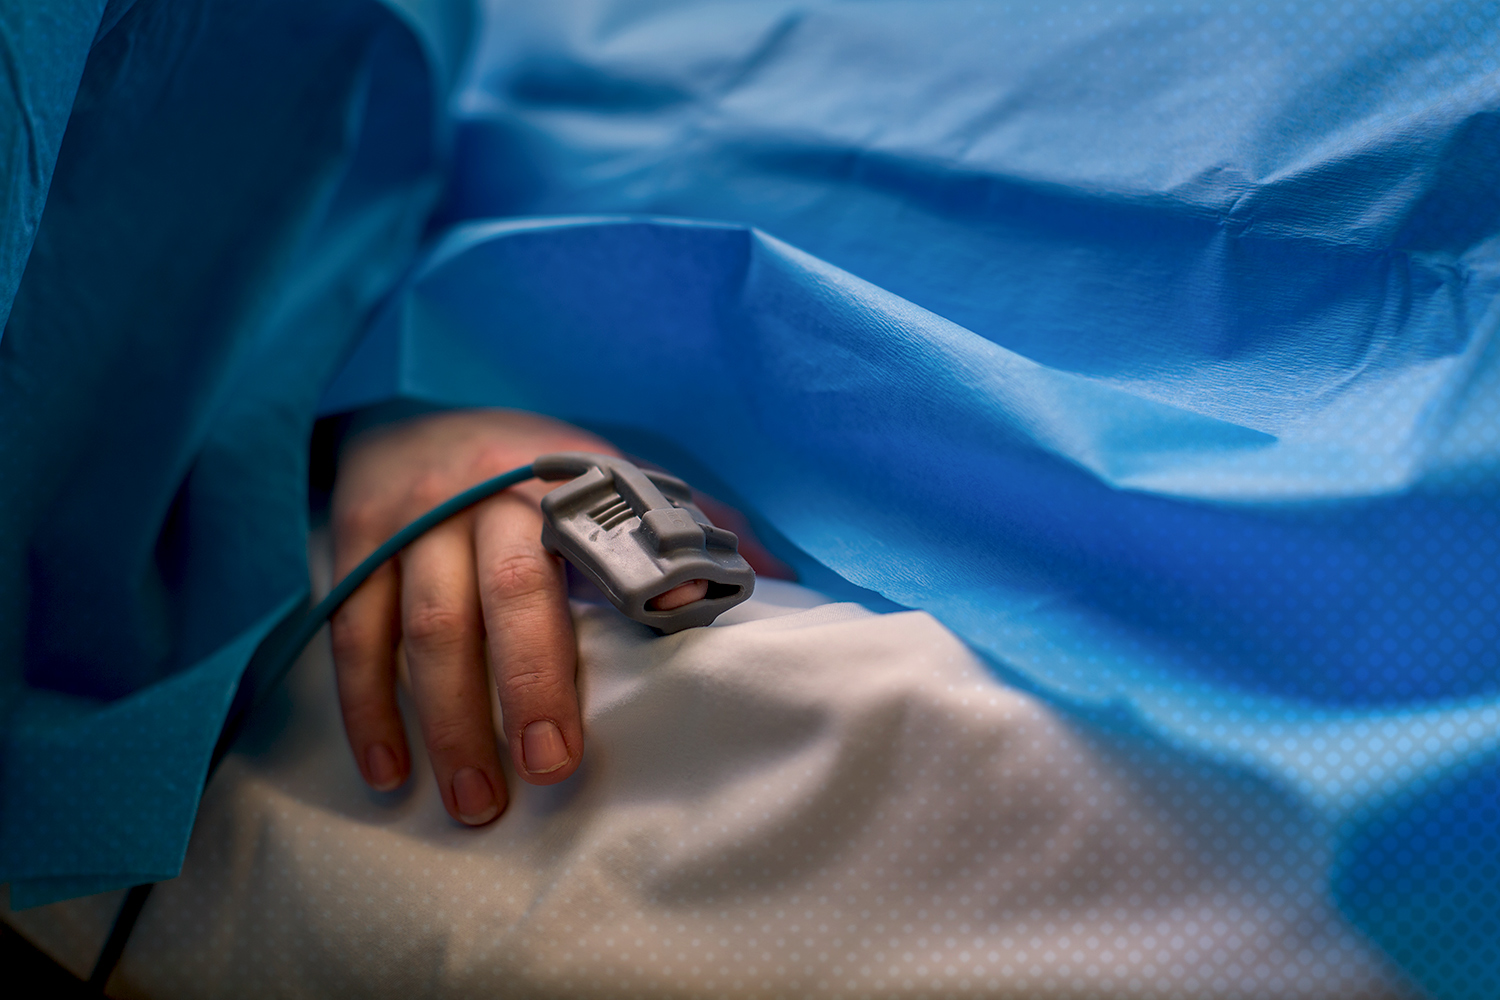 Patients hand on a bed sticking out of a blue surgical sheet with an oximeter 